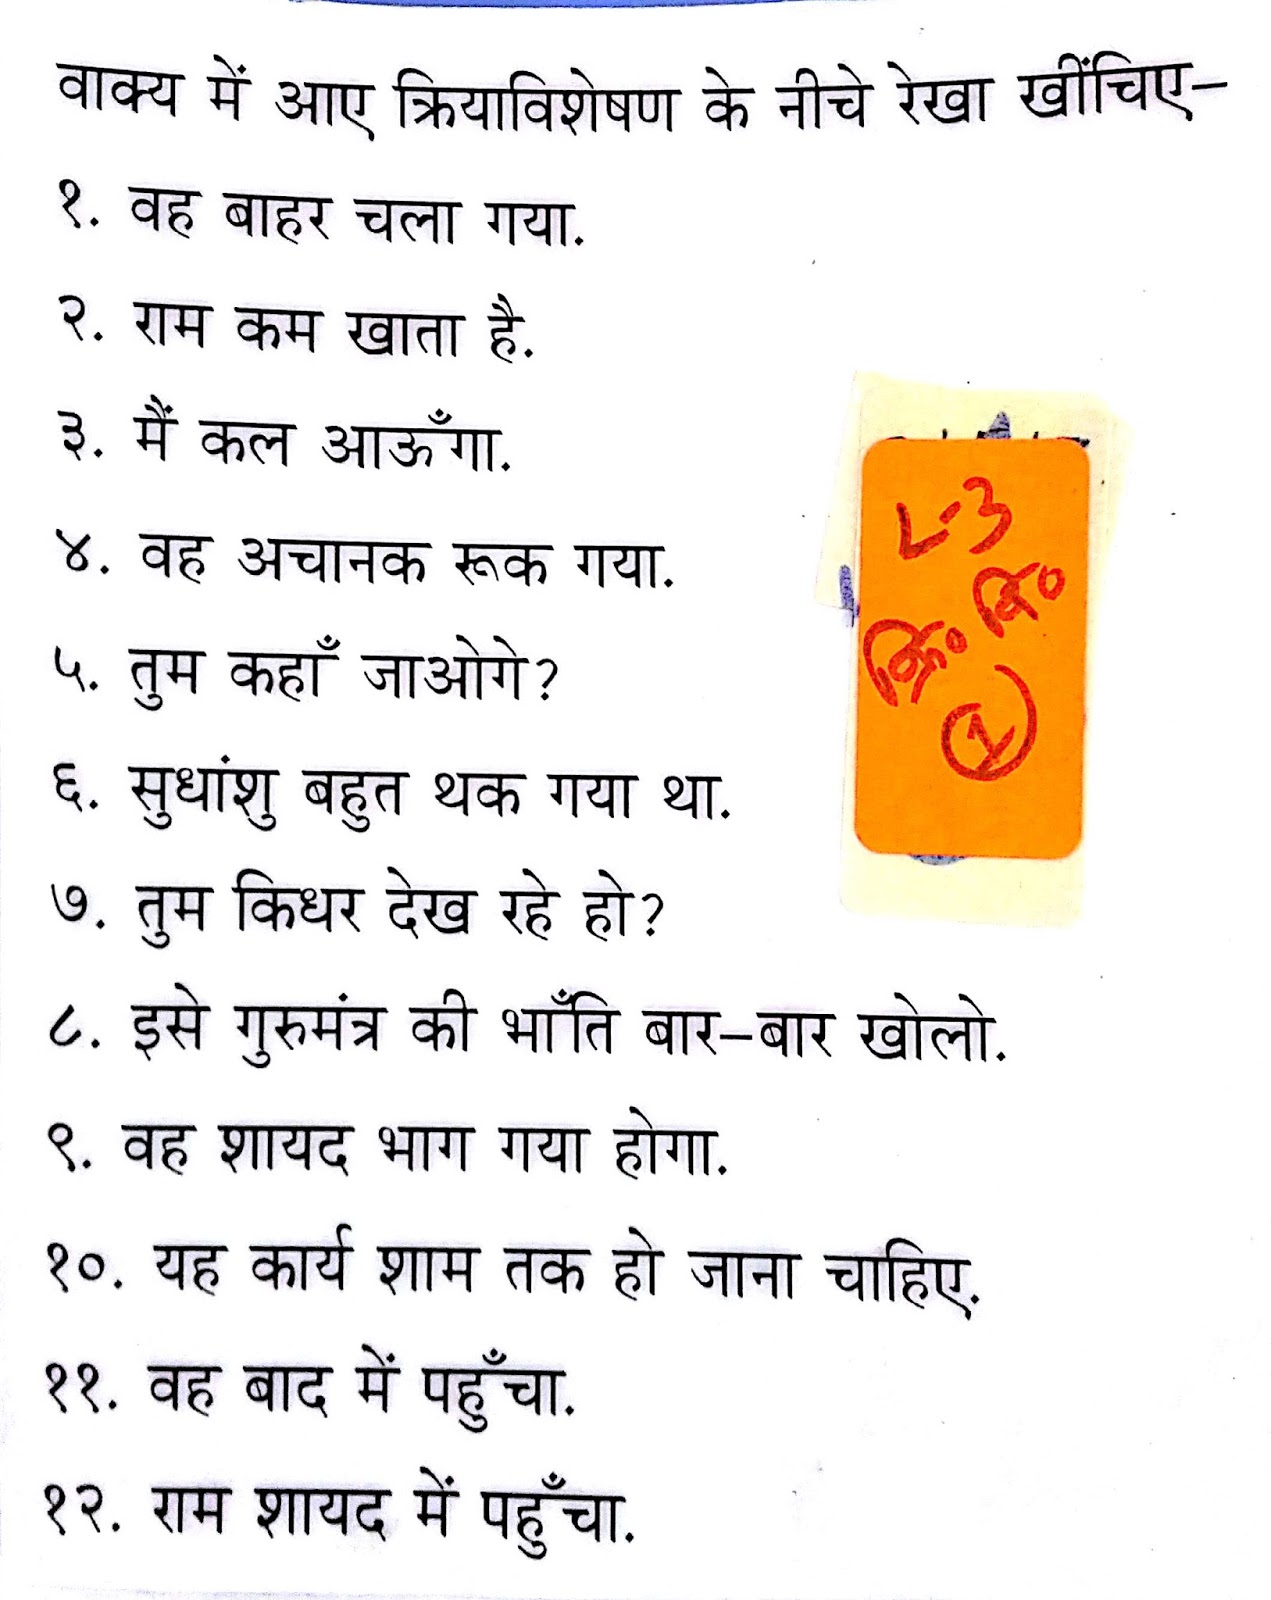 hindi-grammar-work-sheet-collection-for-classes-5-6-7-8-adverb-and-its-types-such-as